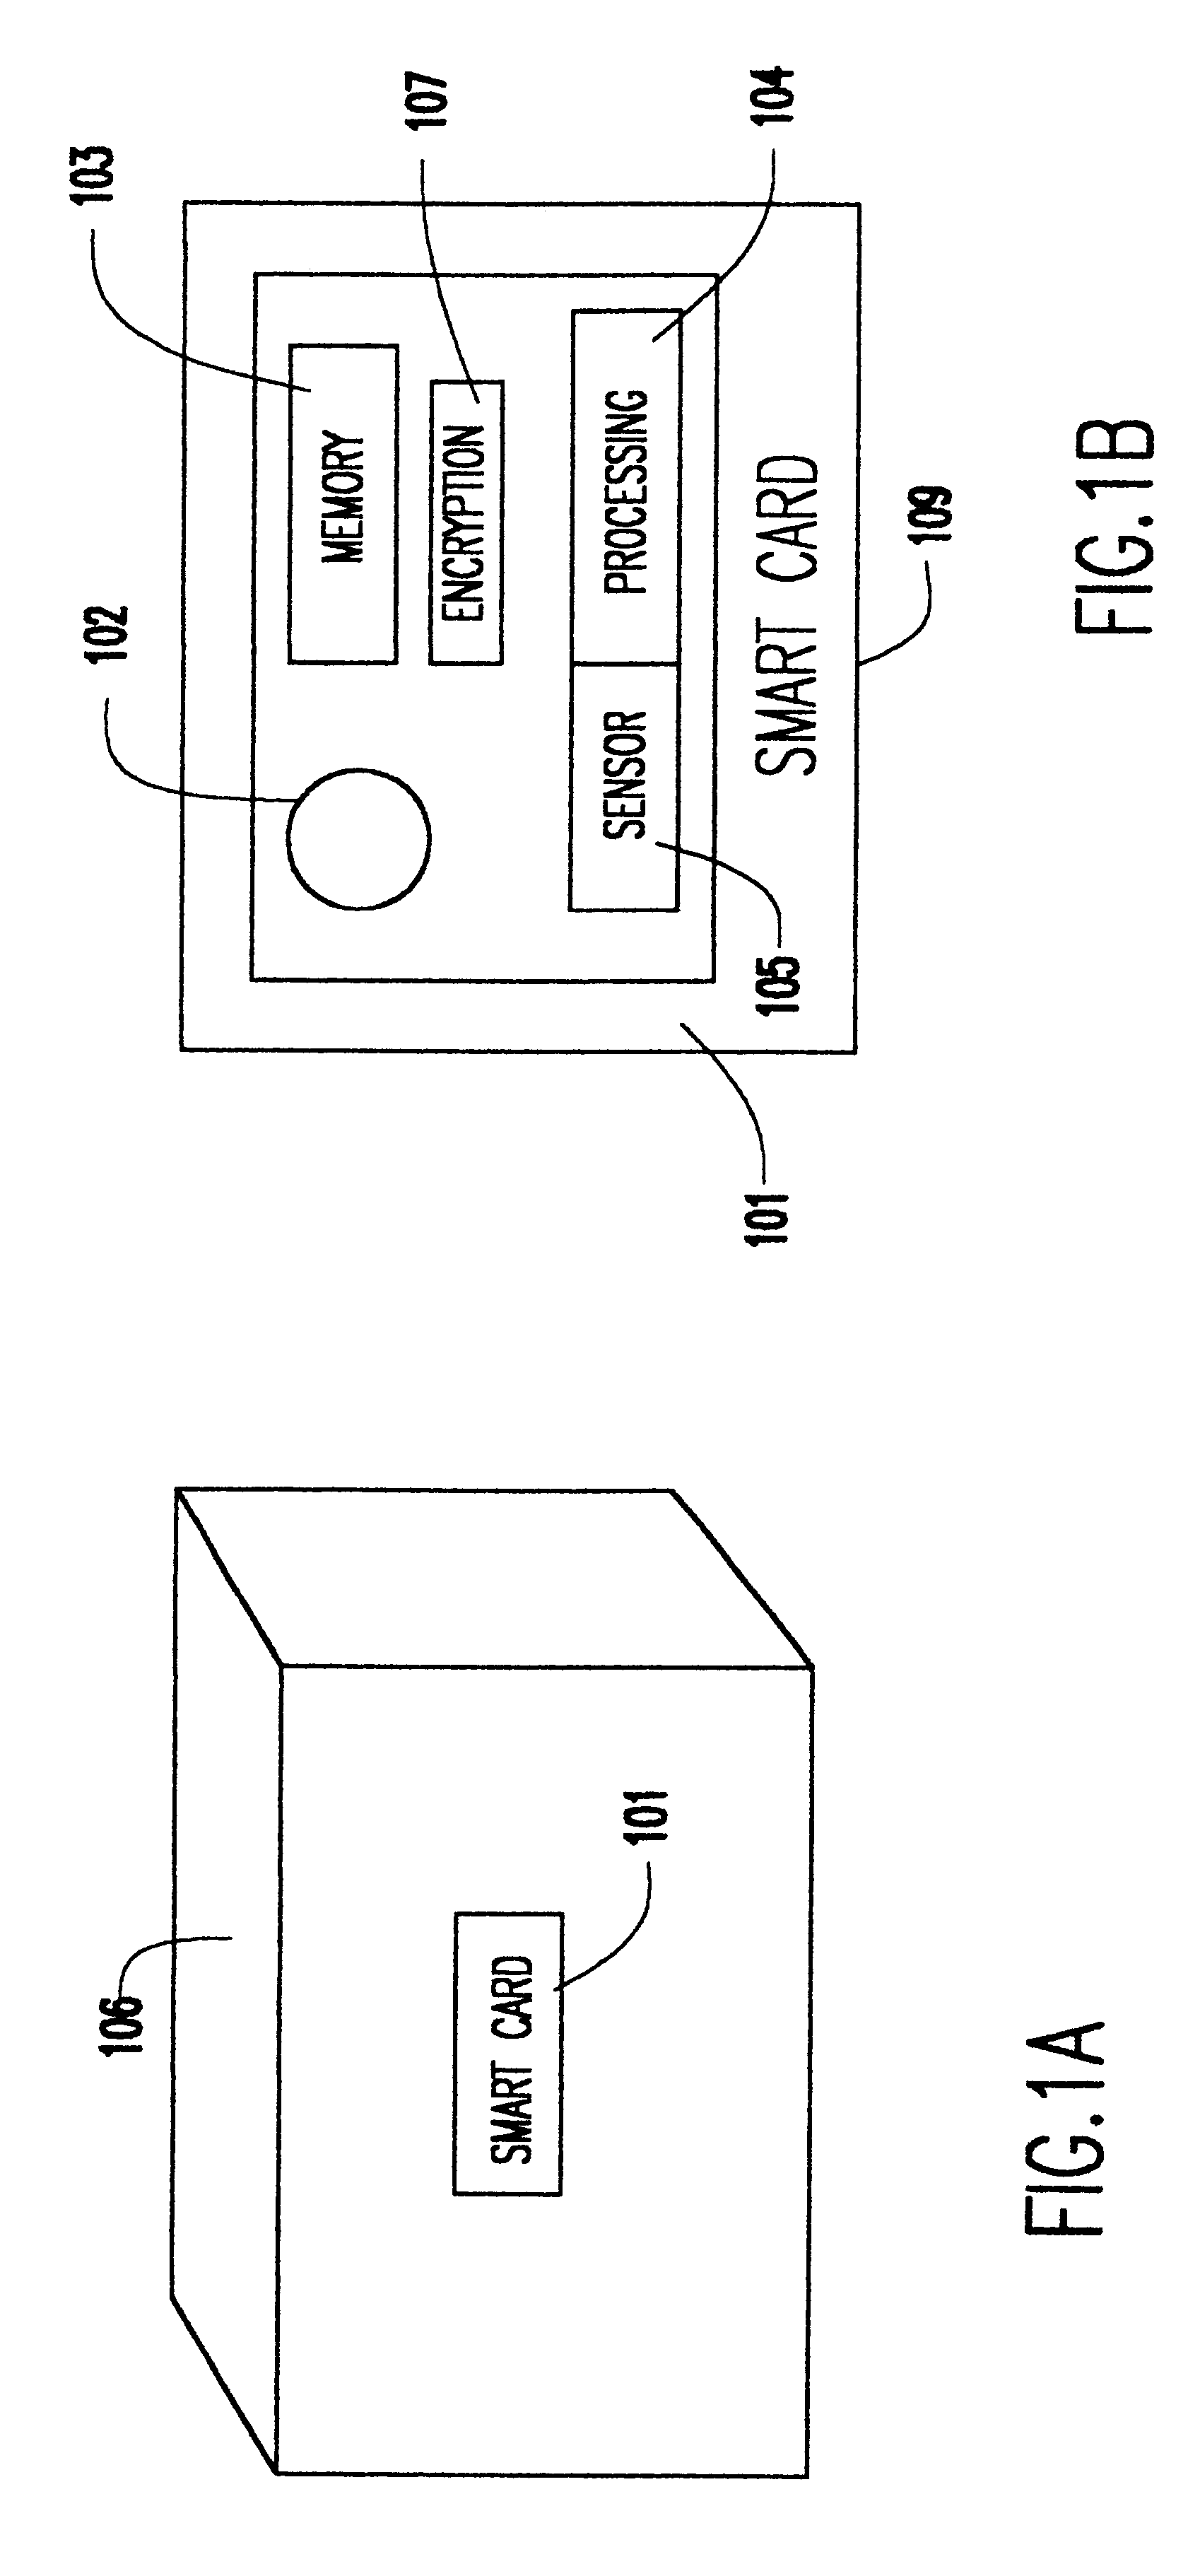 Method and apparatus for securely determining aspects of the history of a good